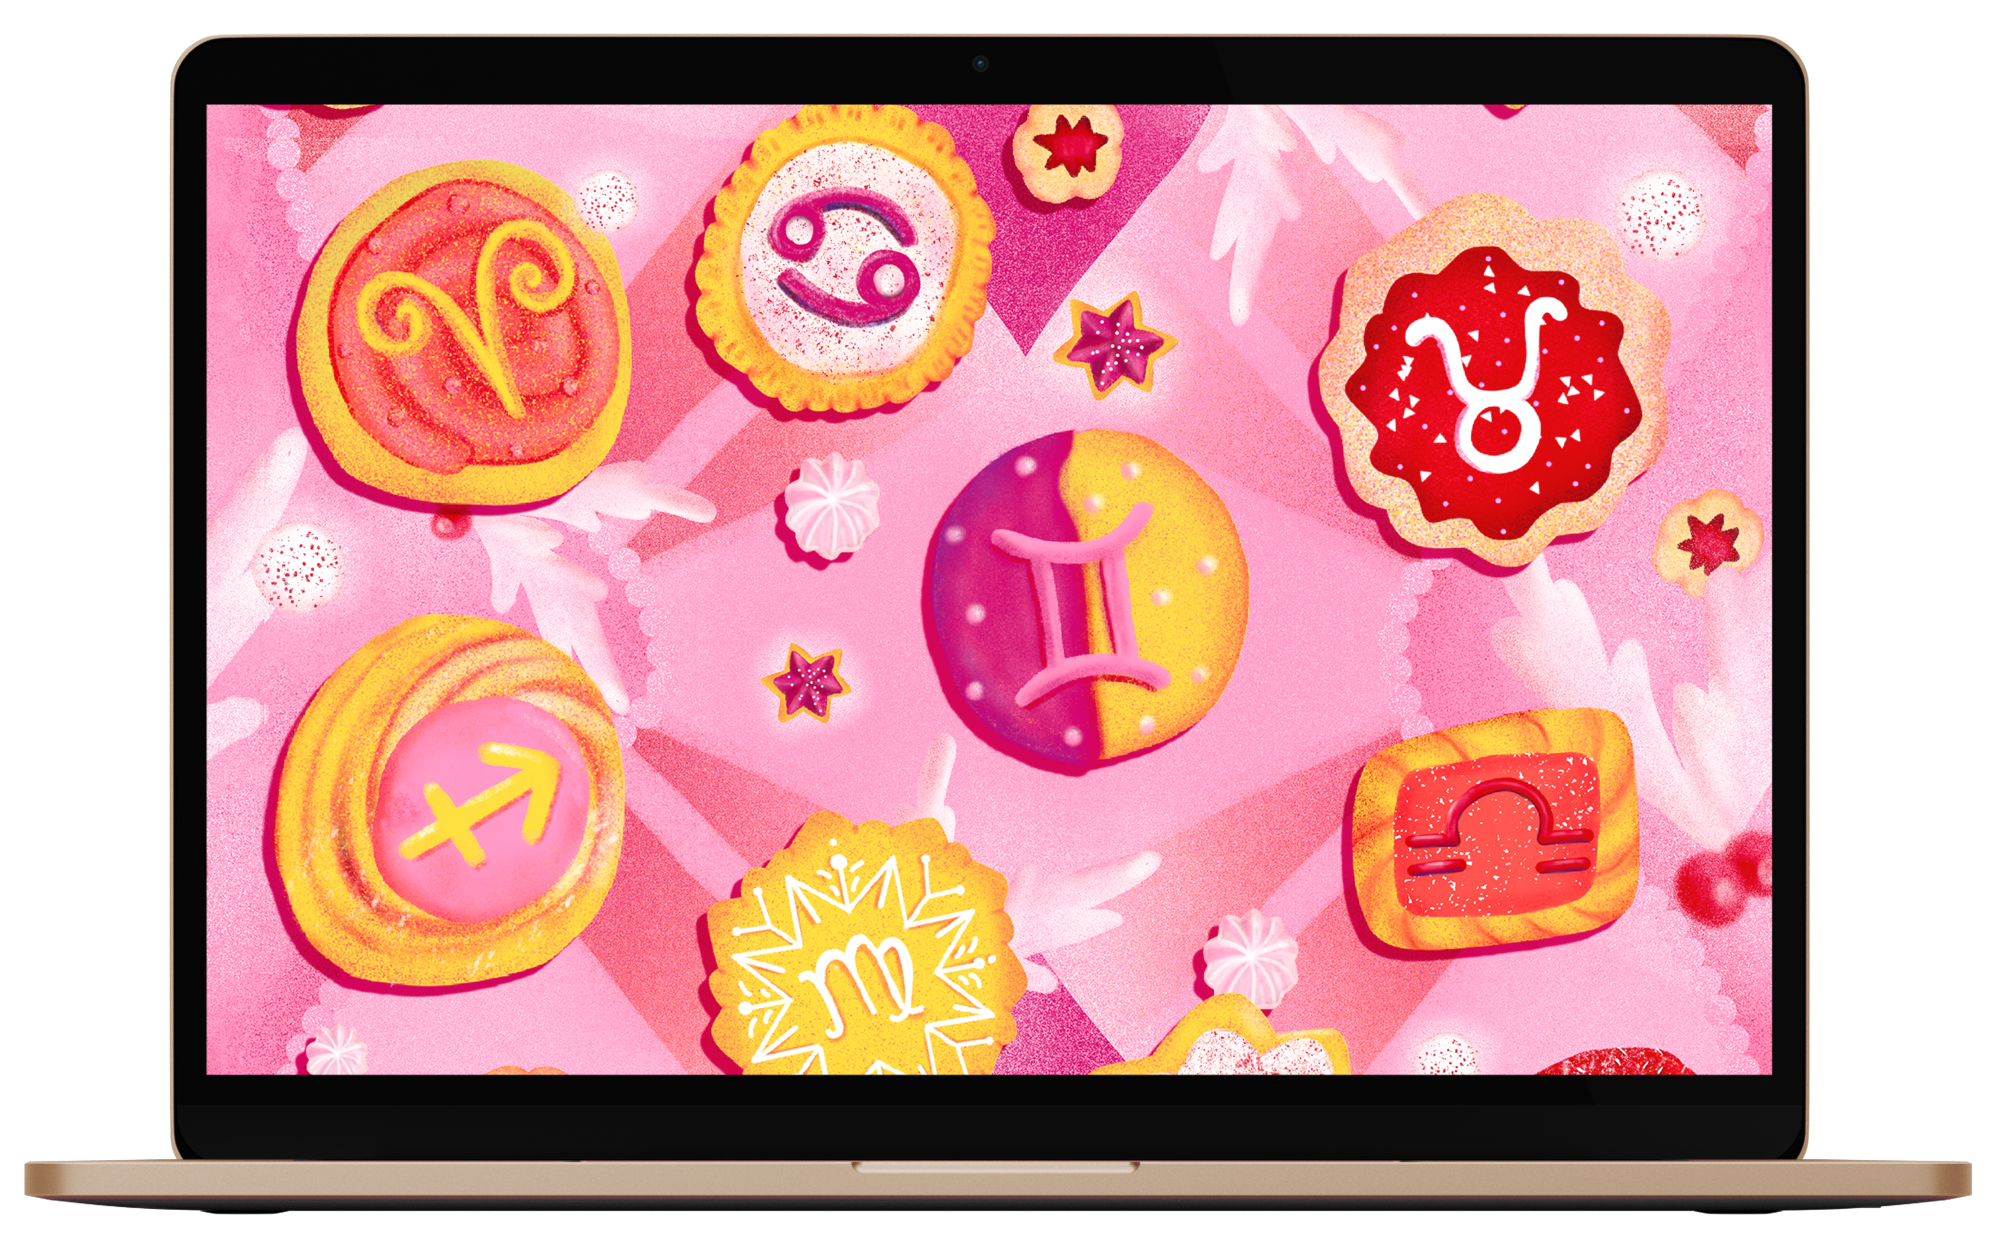 Wallpaper on a laptop of Christmas cookies decorated with astrological signs. 